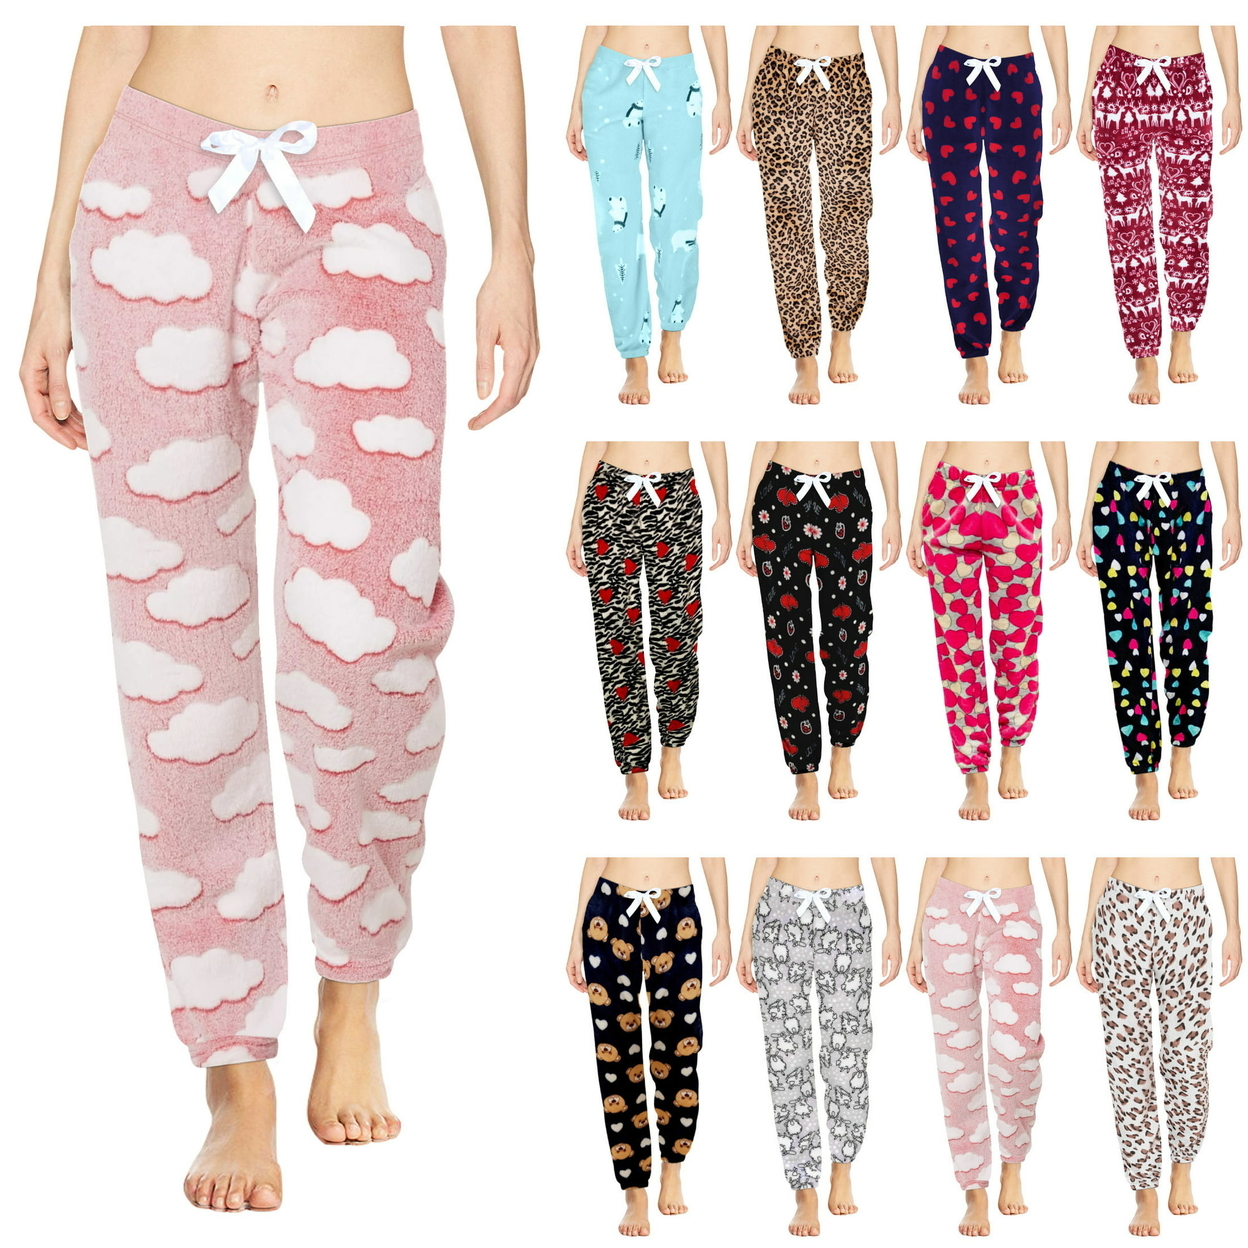 4-Pack: Women's Solid & Printed Ultra-Soft Comfy Stretch Micro-Fleece Pajama Lounge Pants - Xx-large, Animal